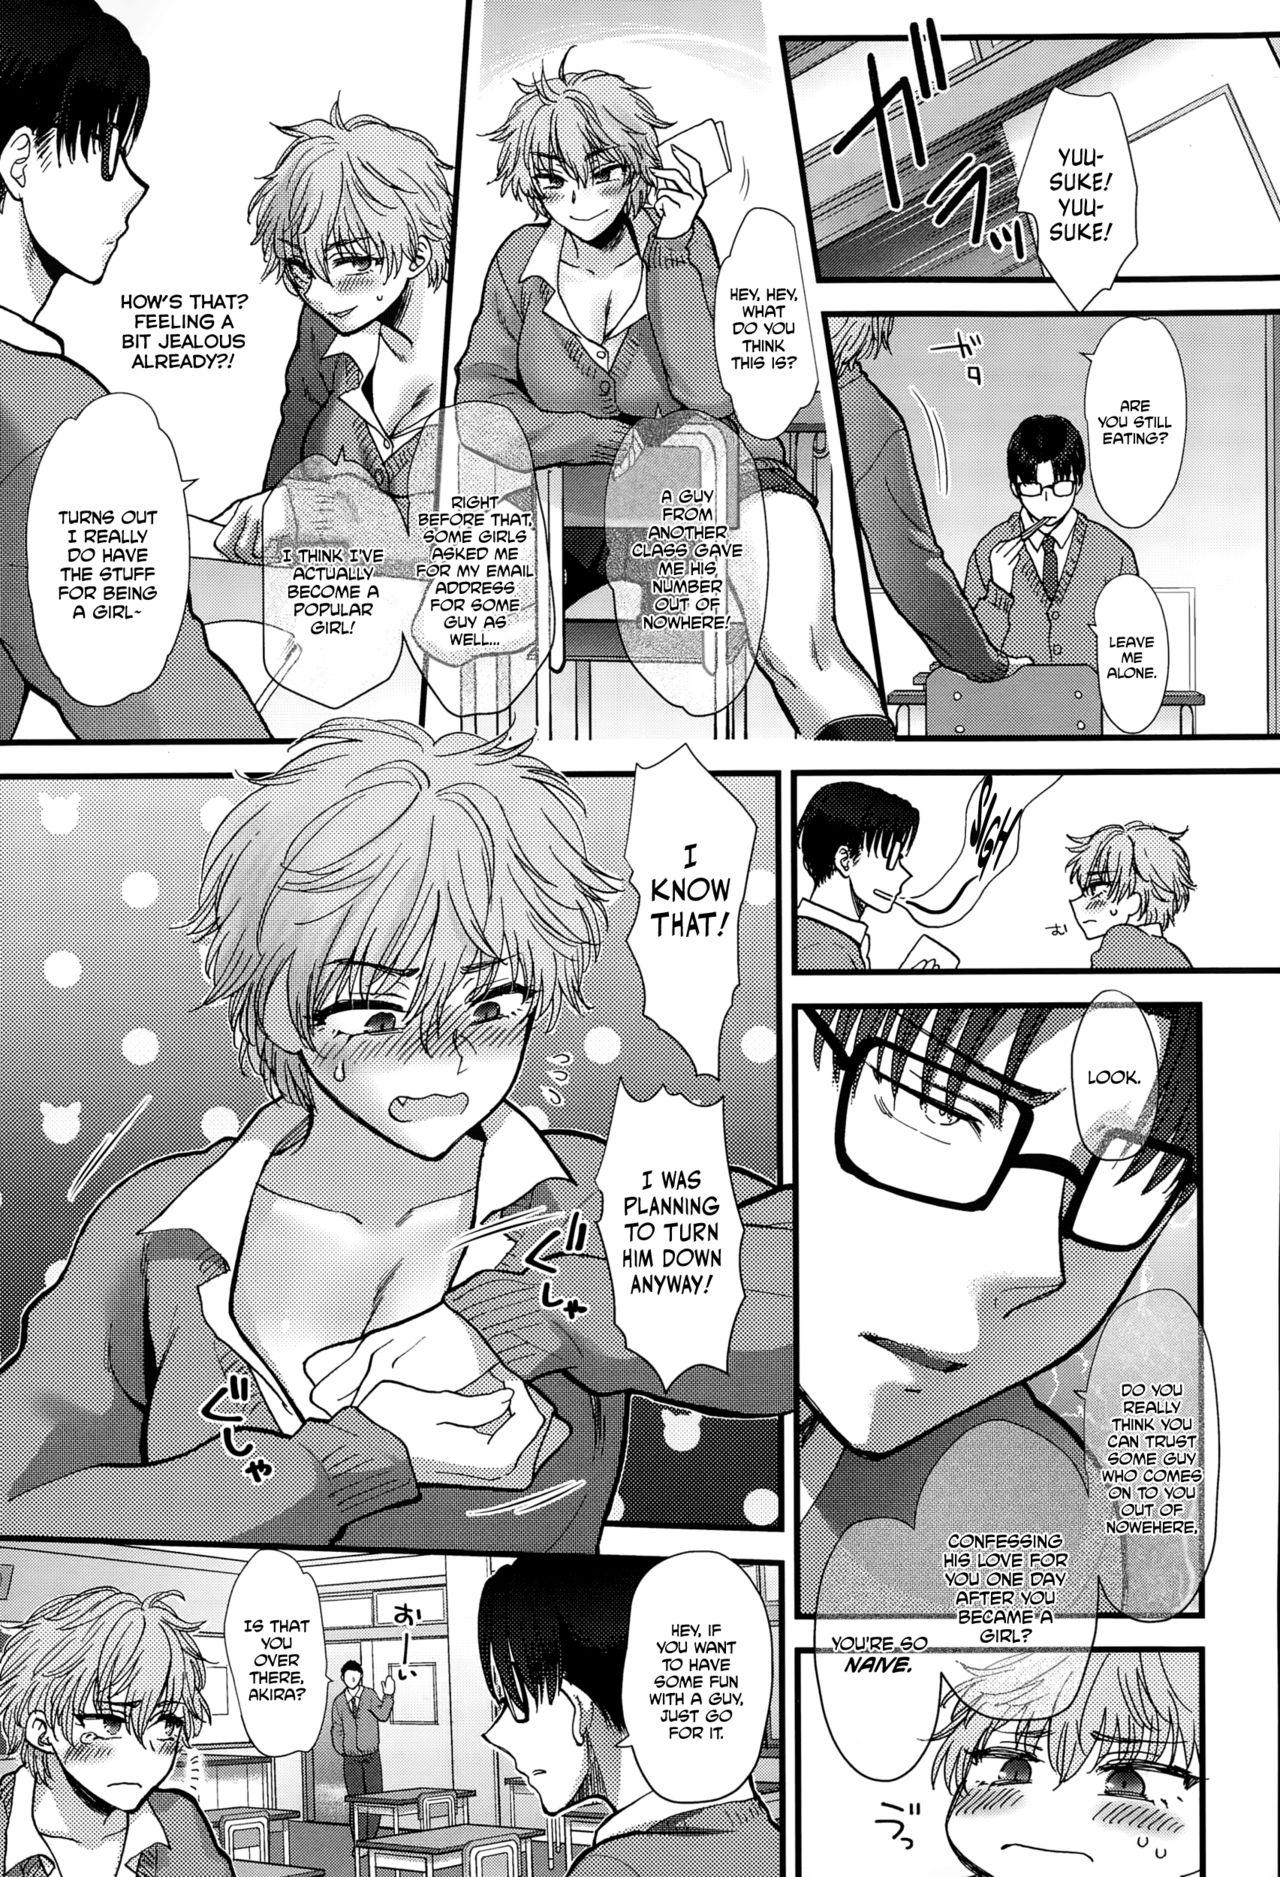 Price Shinyuu Affection - Best Friend Affection Babes - Page 5